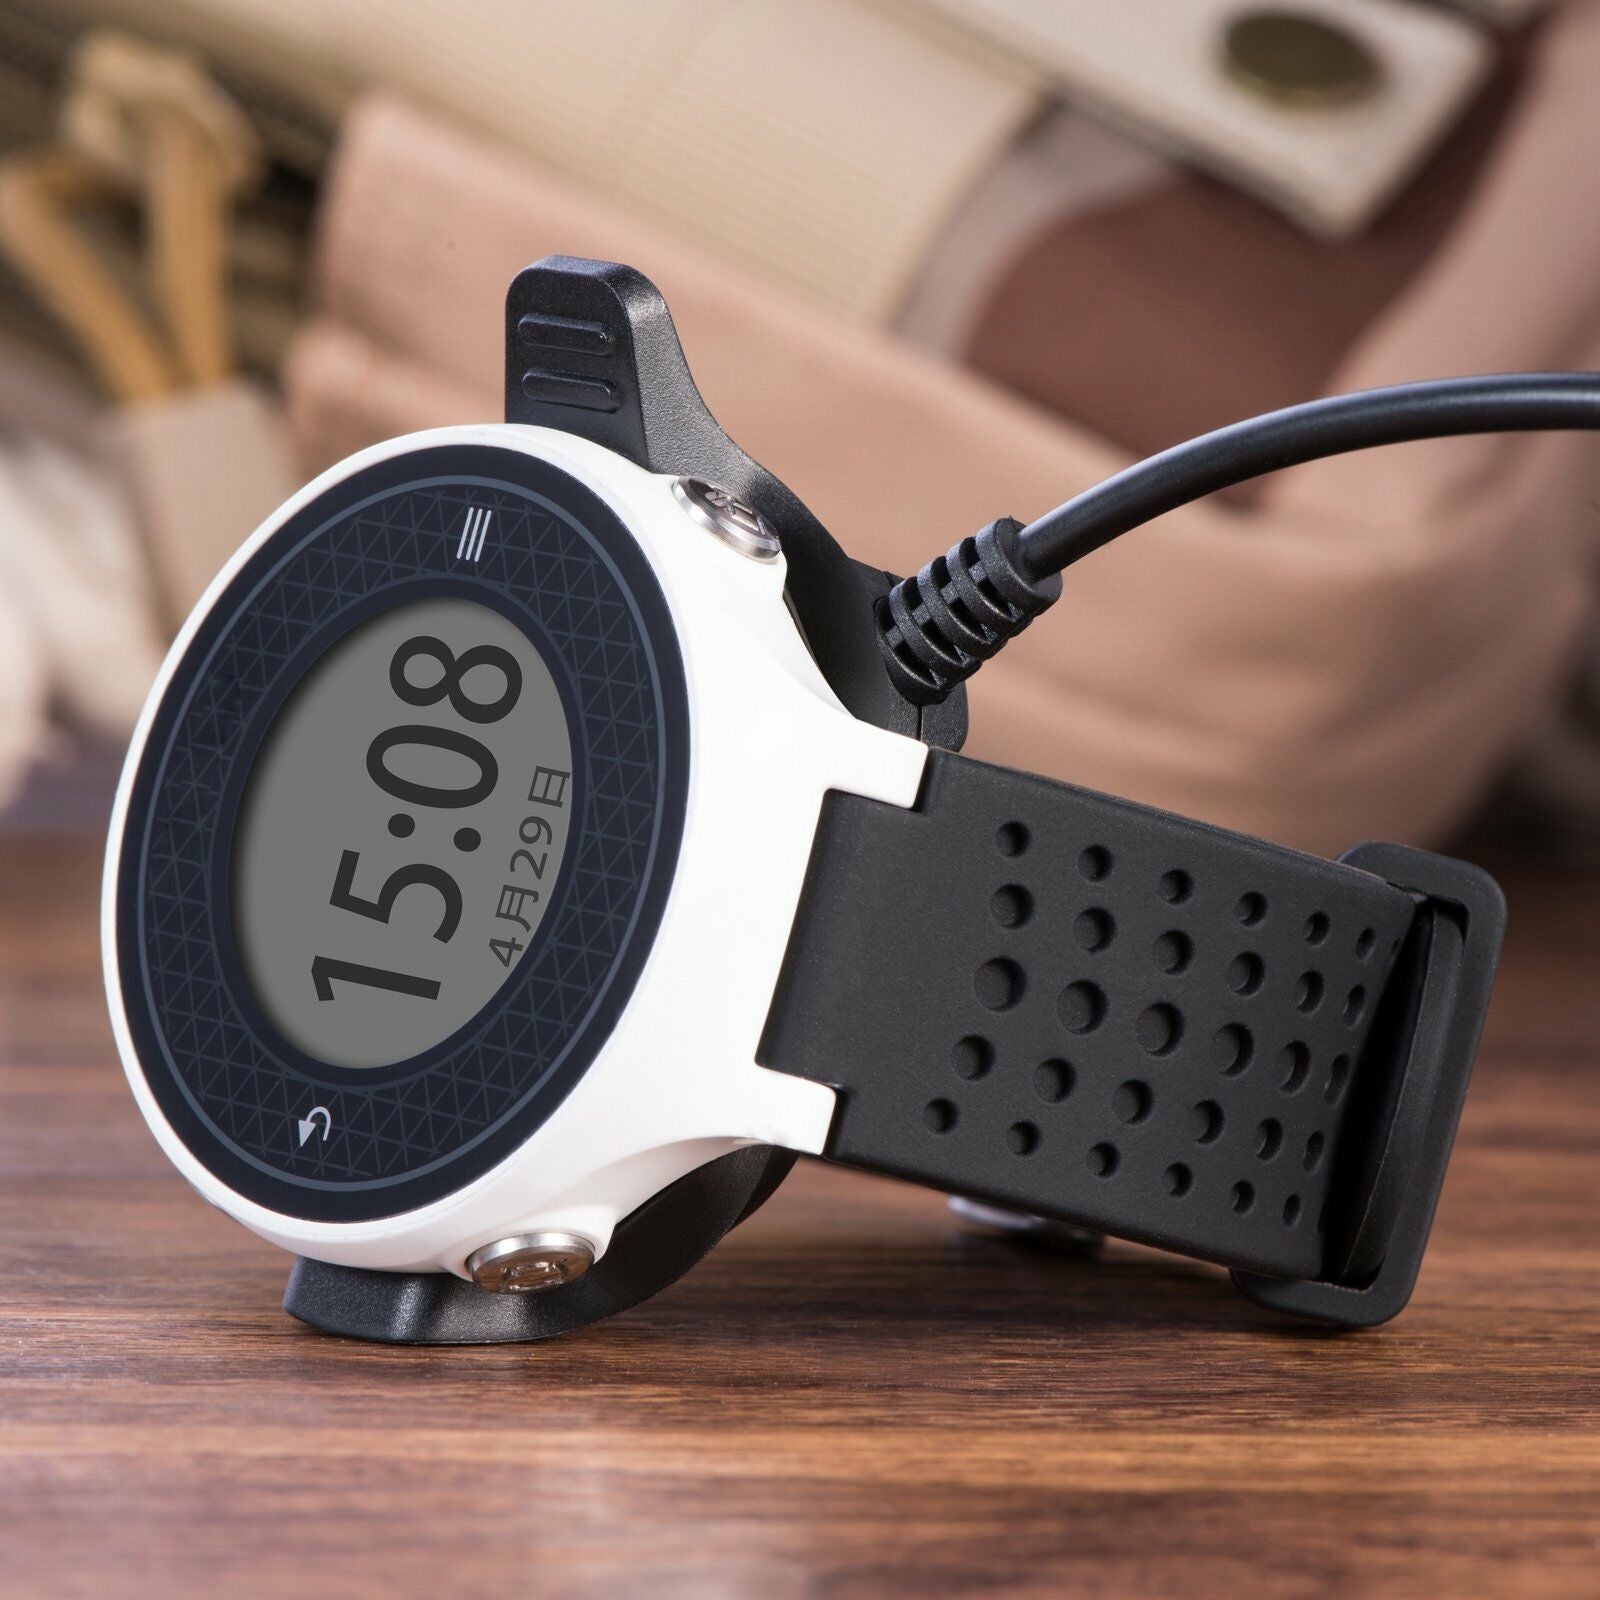 Replacement USB Data Charging Cradle Charger for Garmin Approach S2 S4 Watch